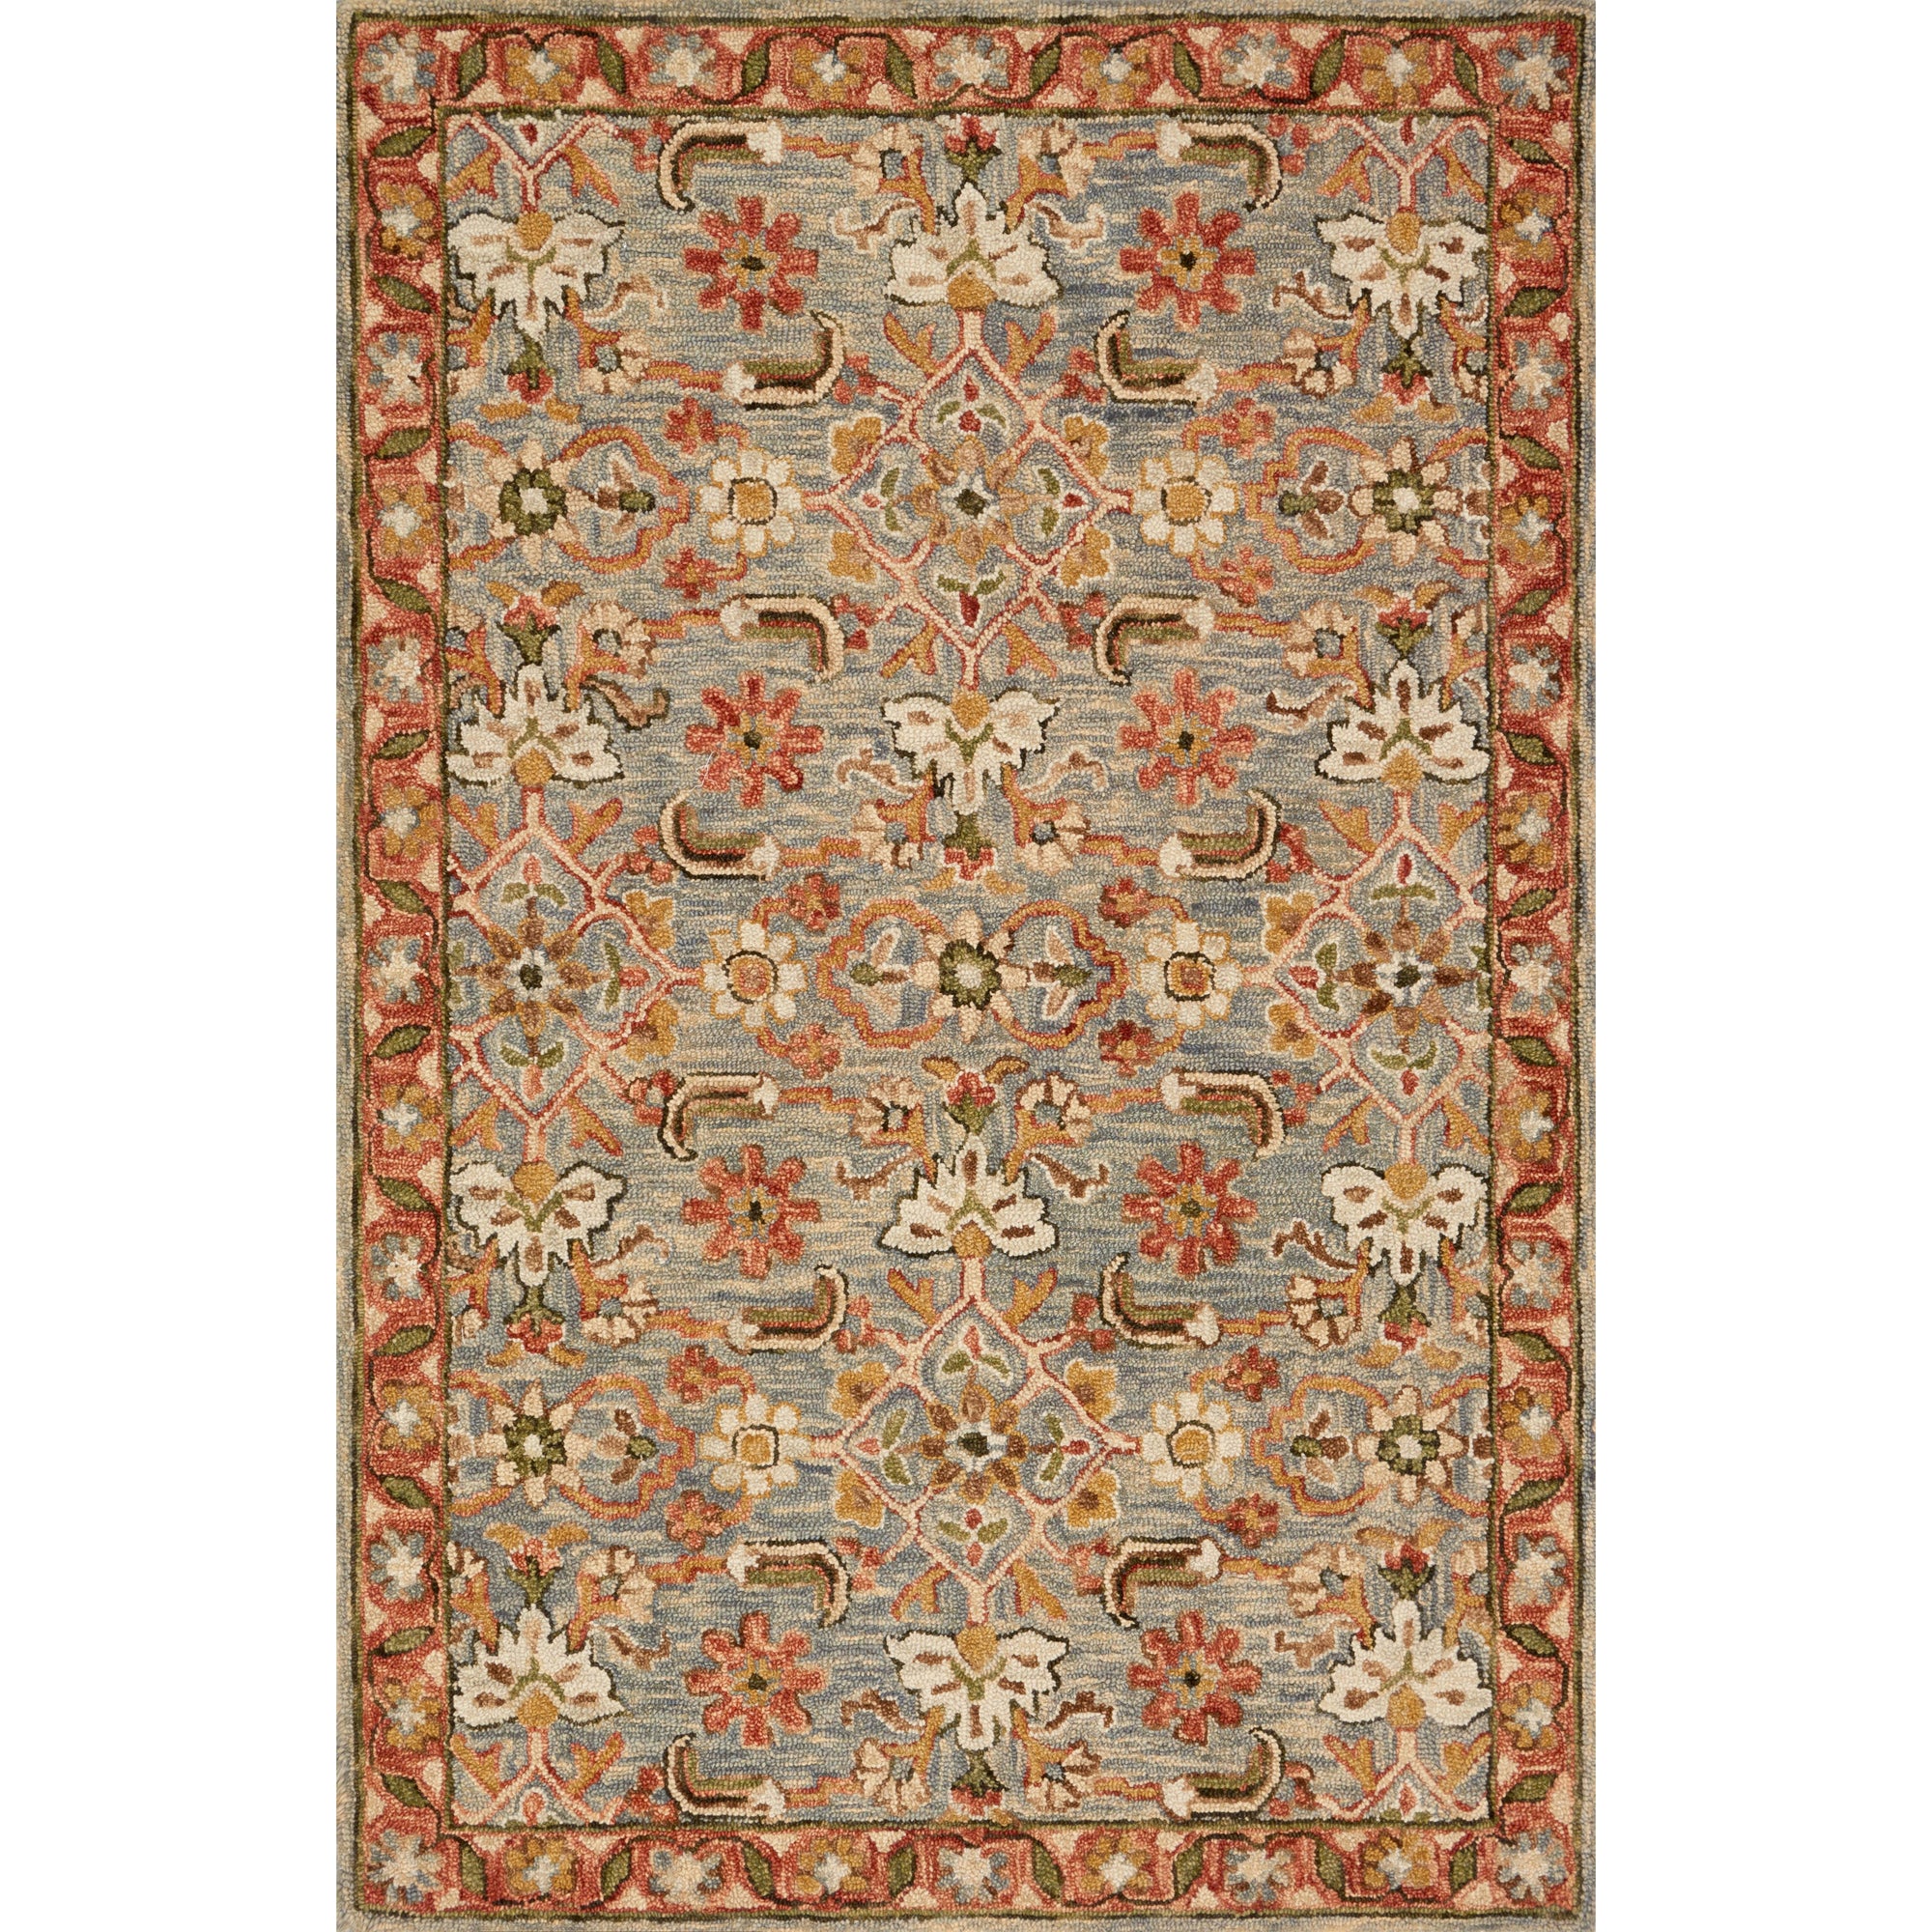 Rugs by Roo Loloi Victoria Slate Terracotta Area Rug in size 18" x 18" Sample